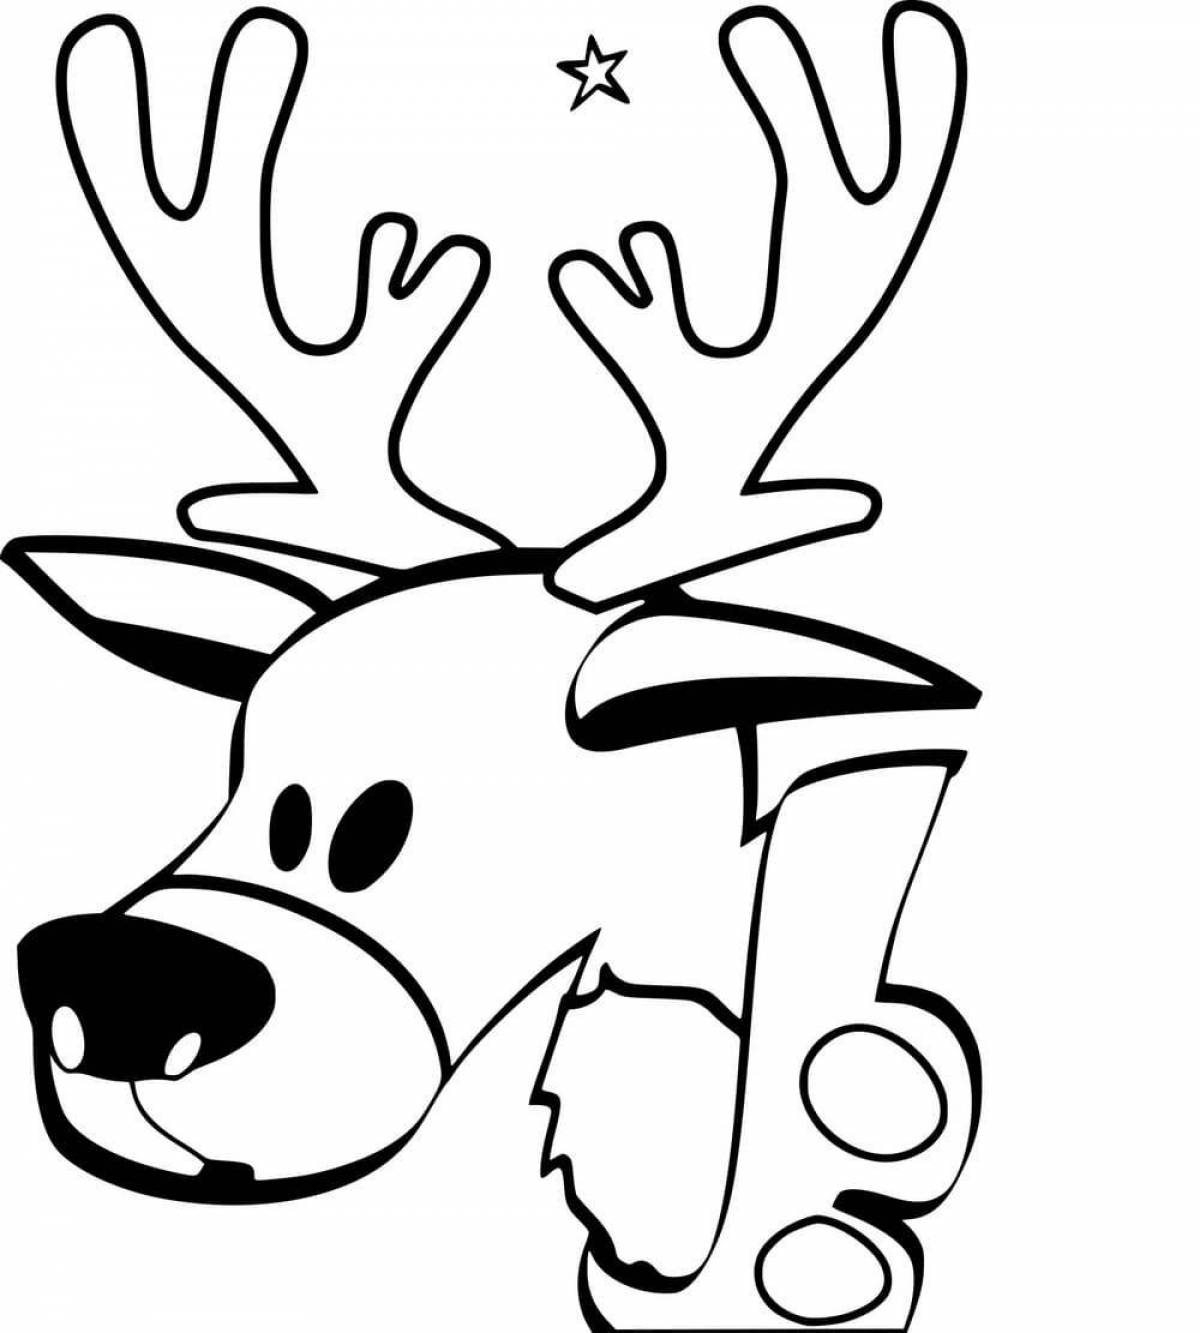 Playful deer coloring page for kids